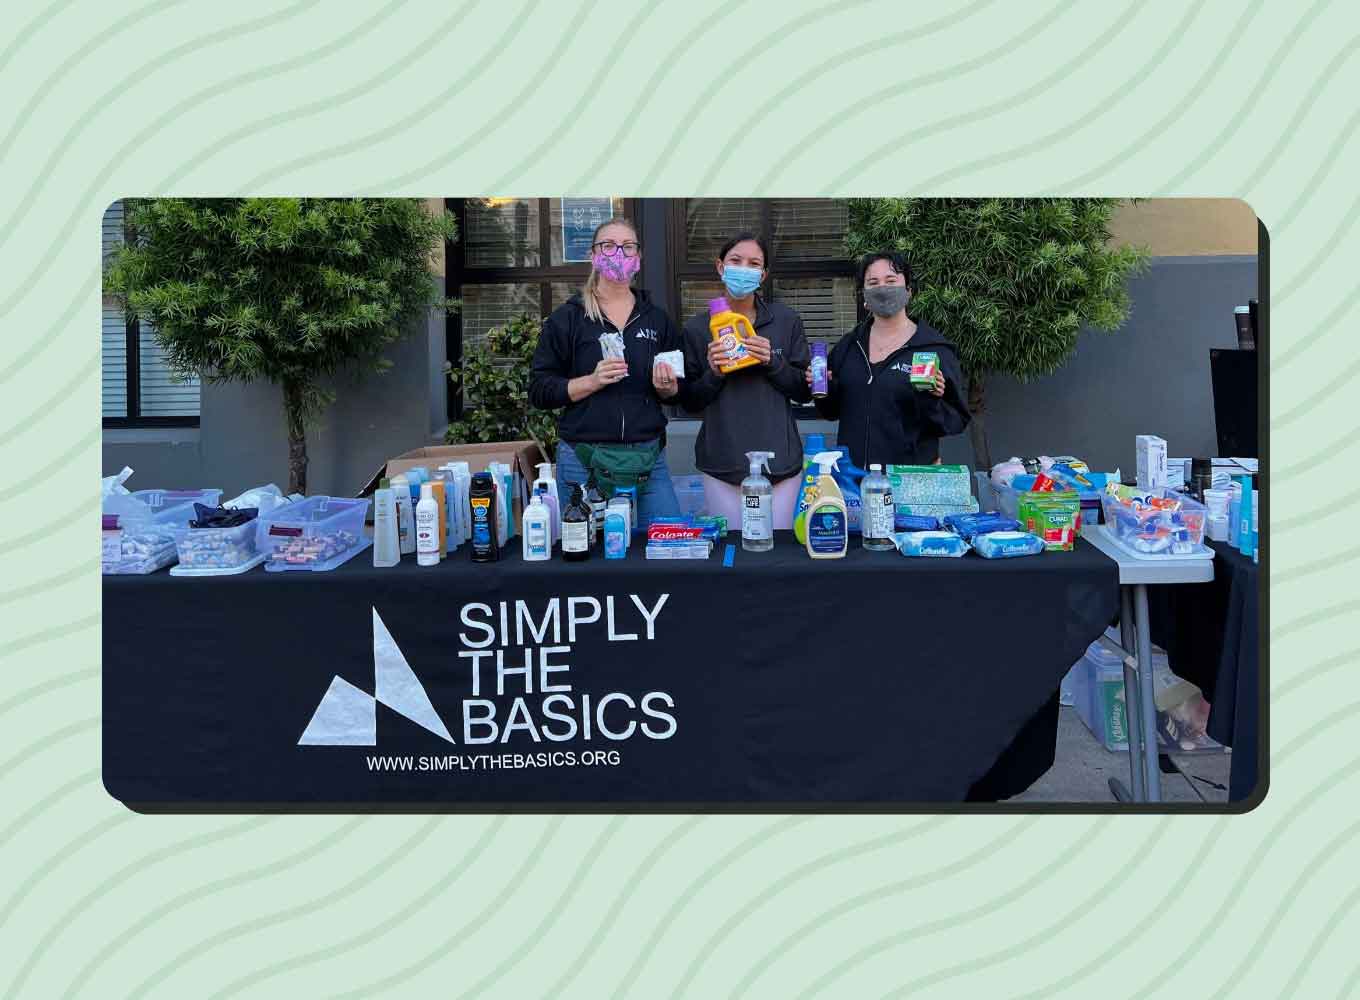 Three women stand behind a table holding up hygiene products